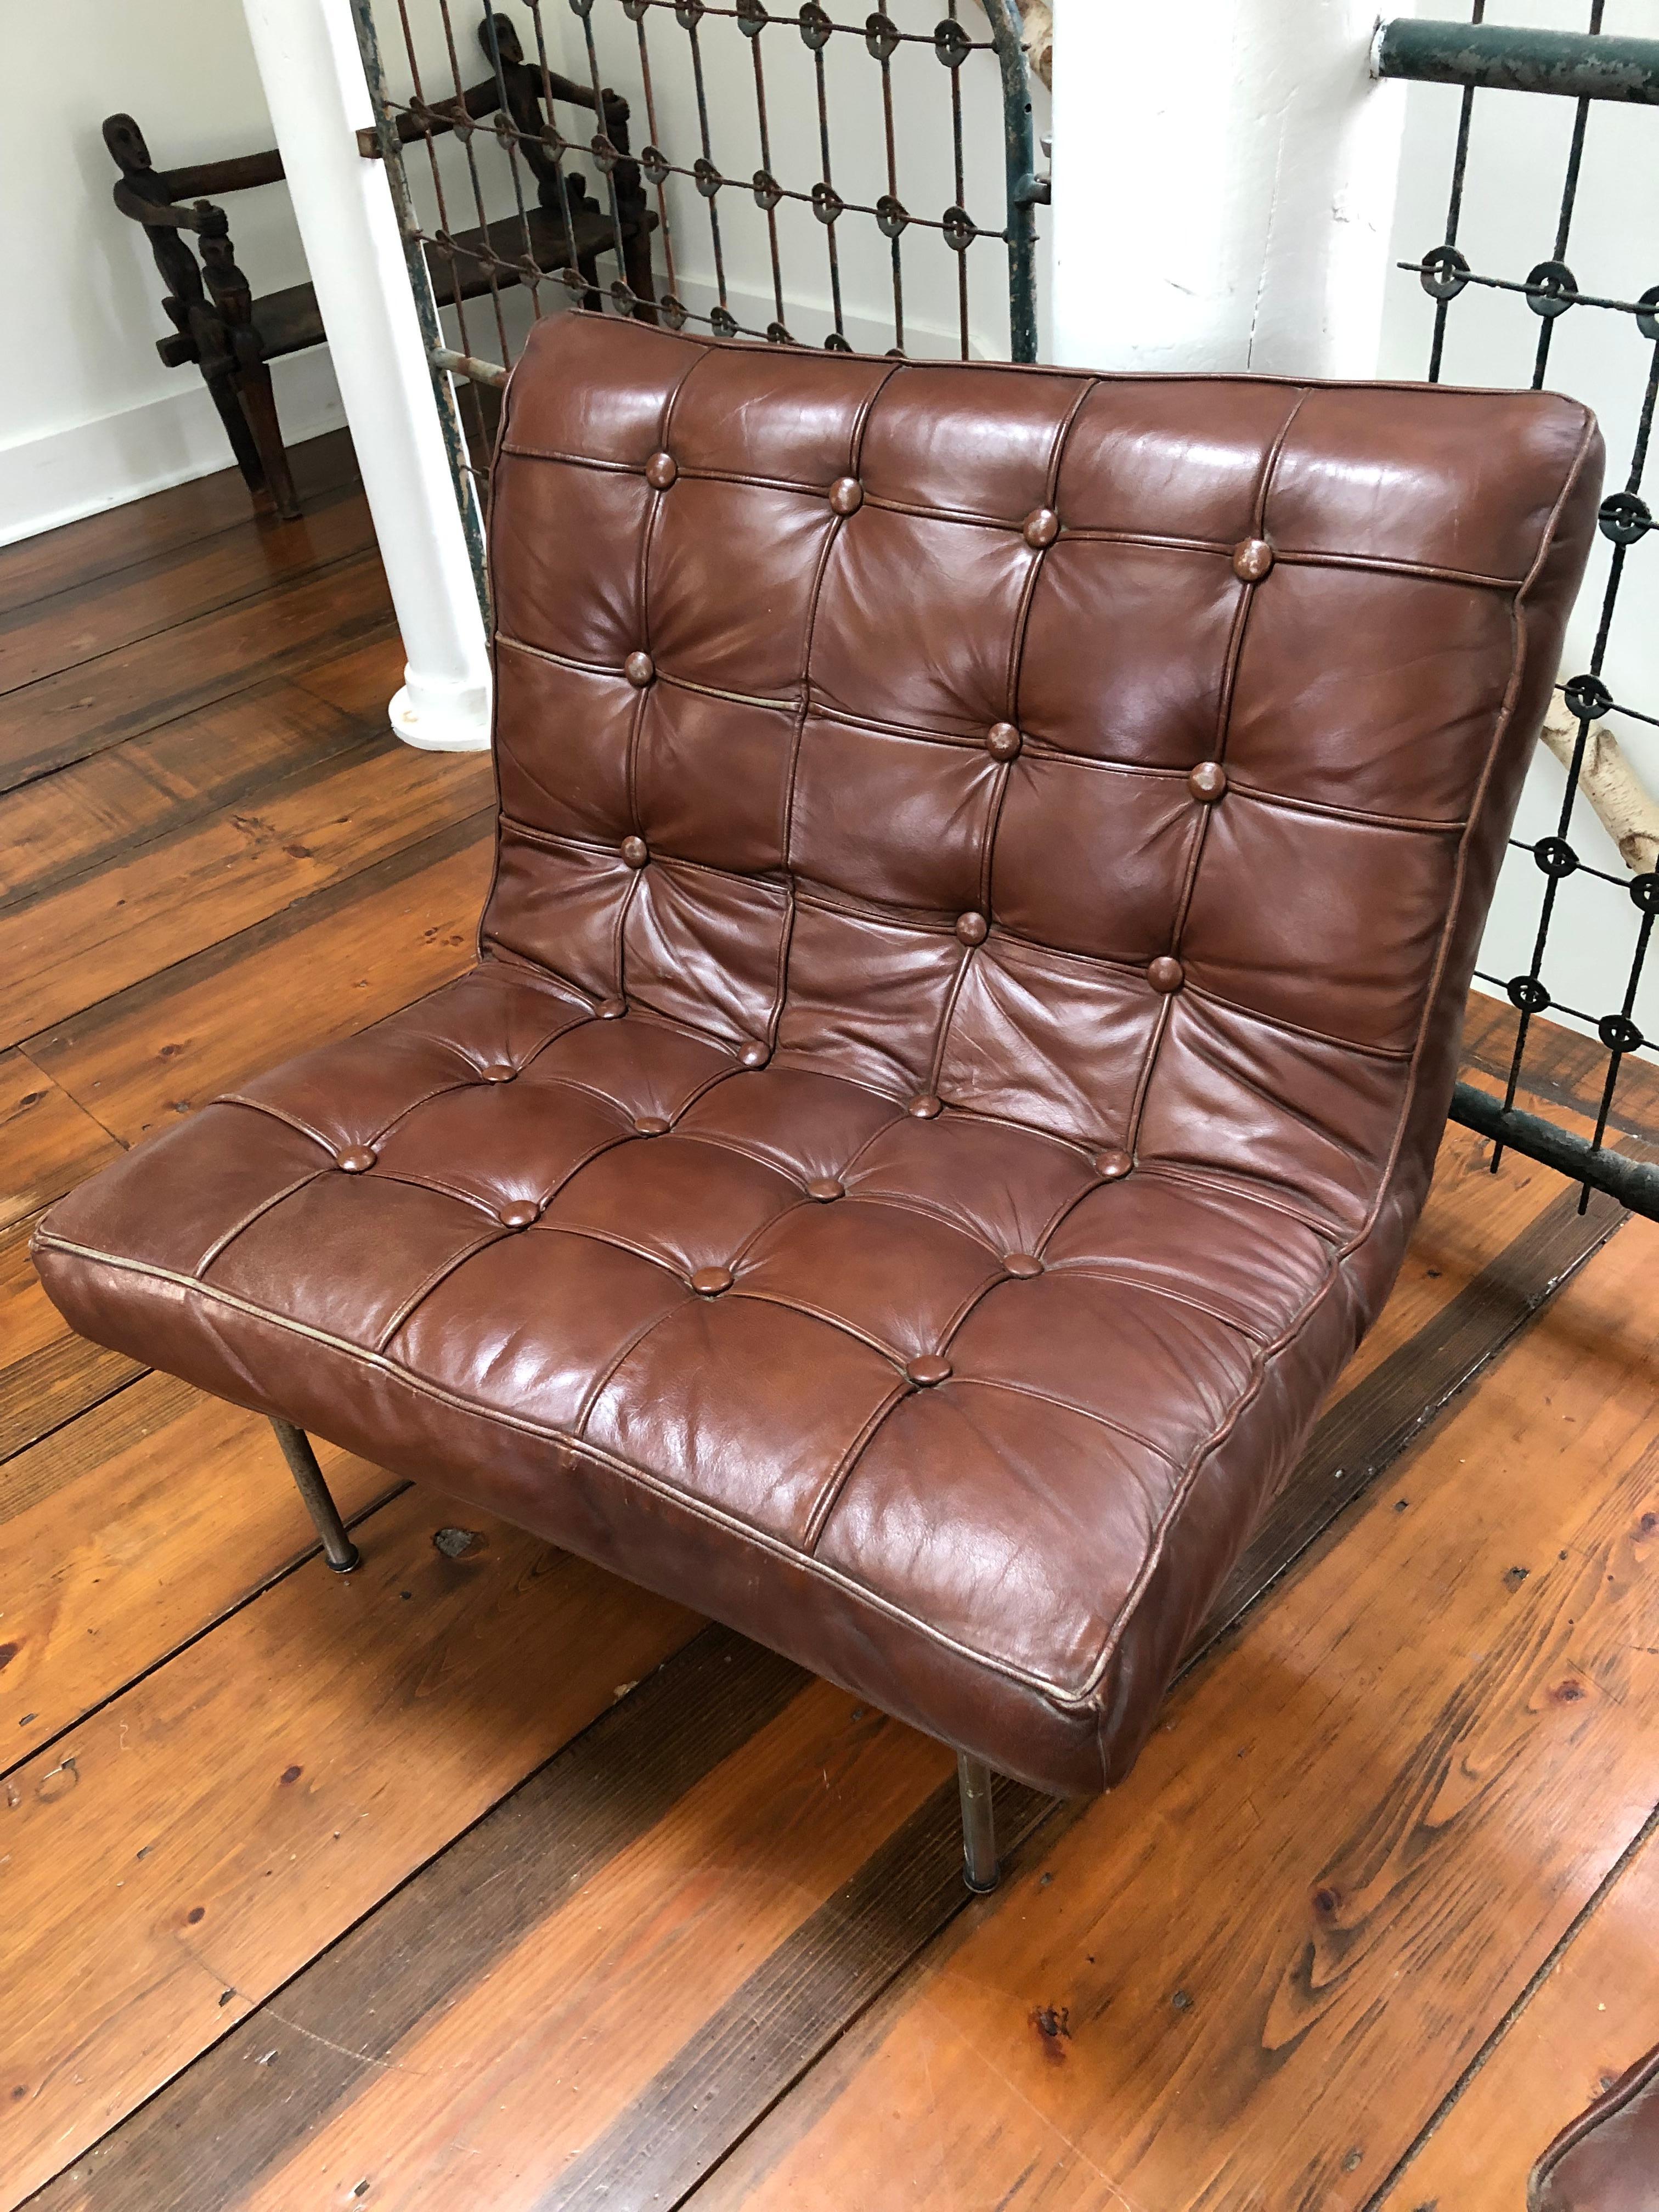 Iconic Barcelona style heavy solid chocolately leather and steel club chairs. A fabulous hipster look in their slightly distressed condition. No rips or tears. Heavy leather body sits on steel frames and are substantial enough to not need straps.